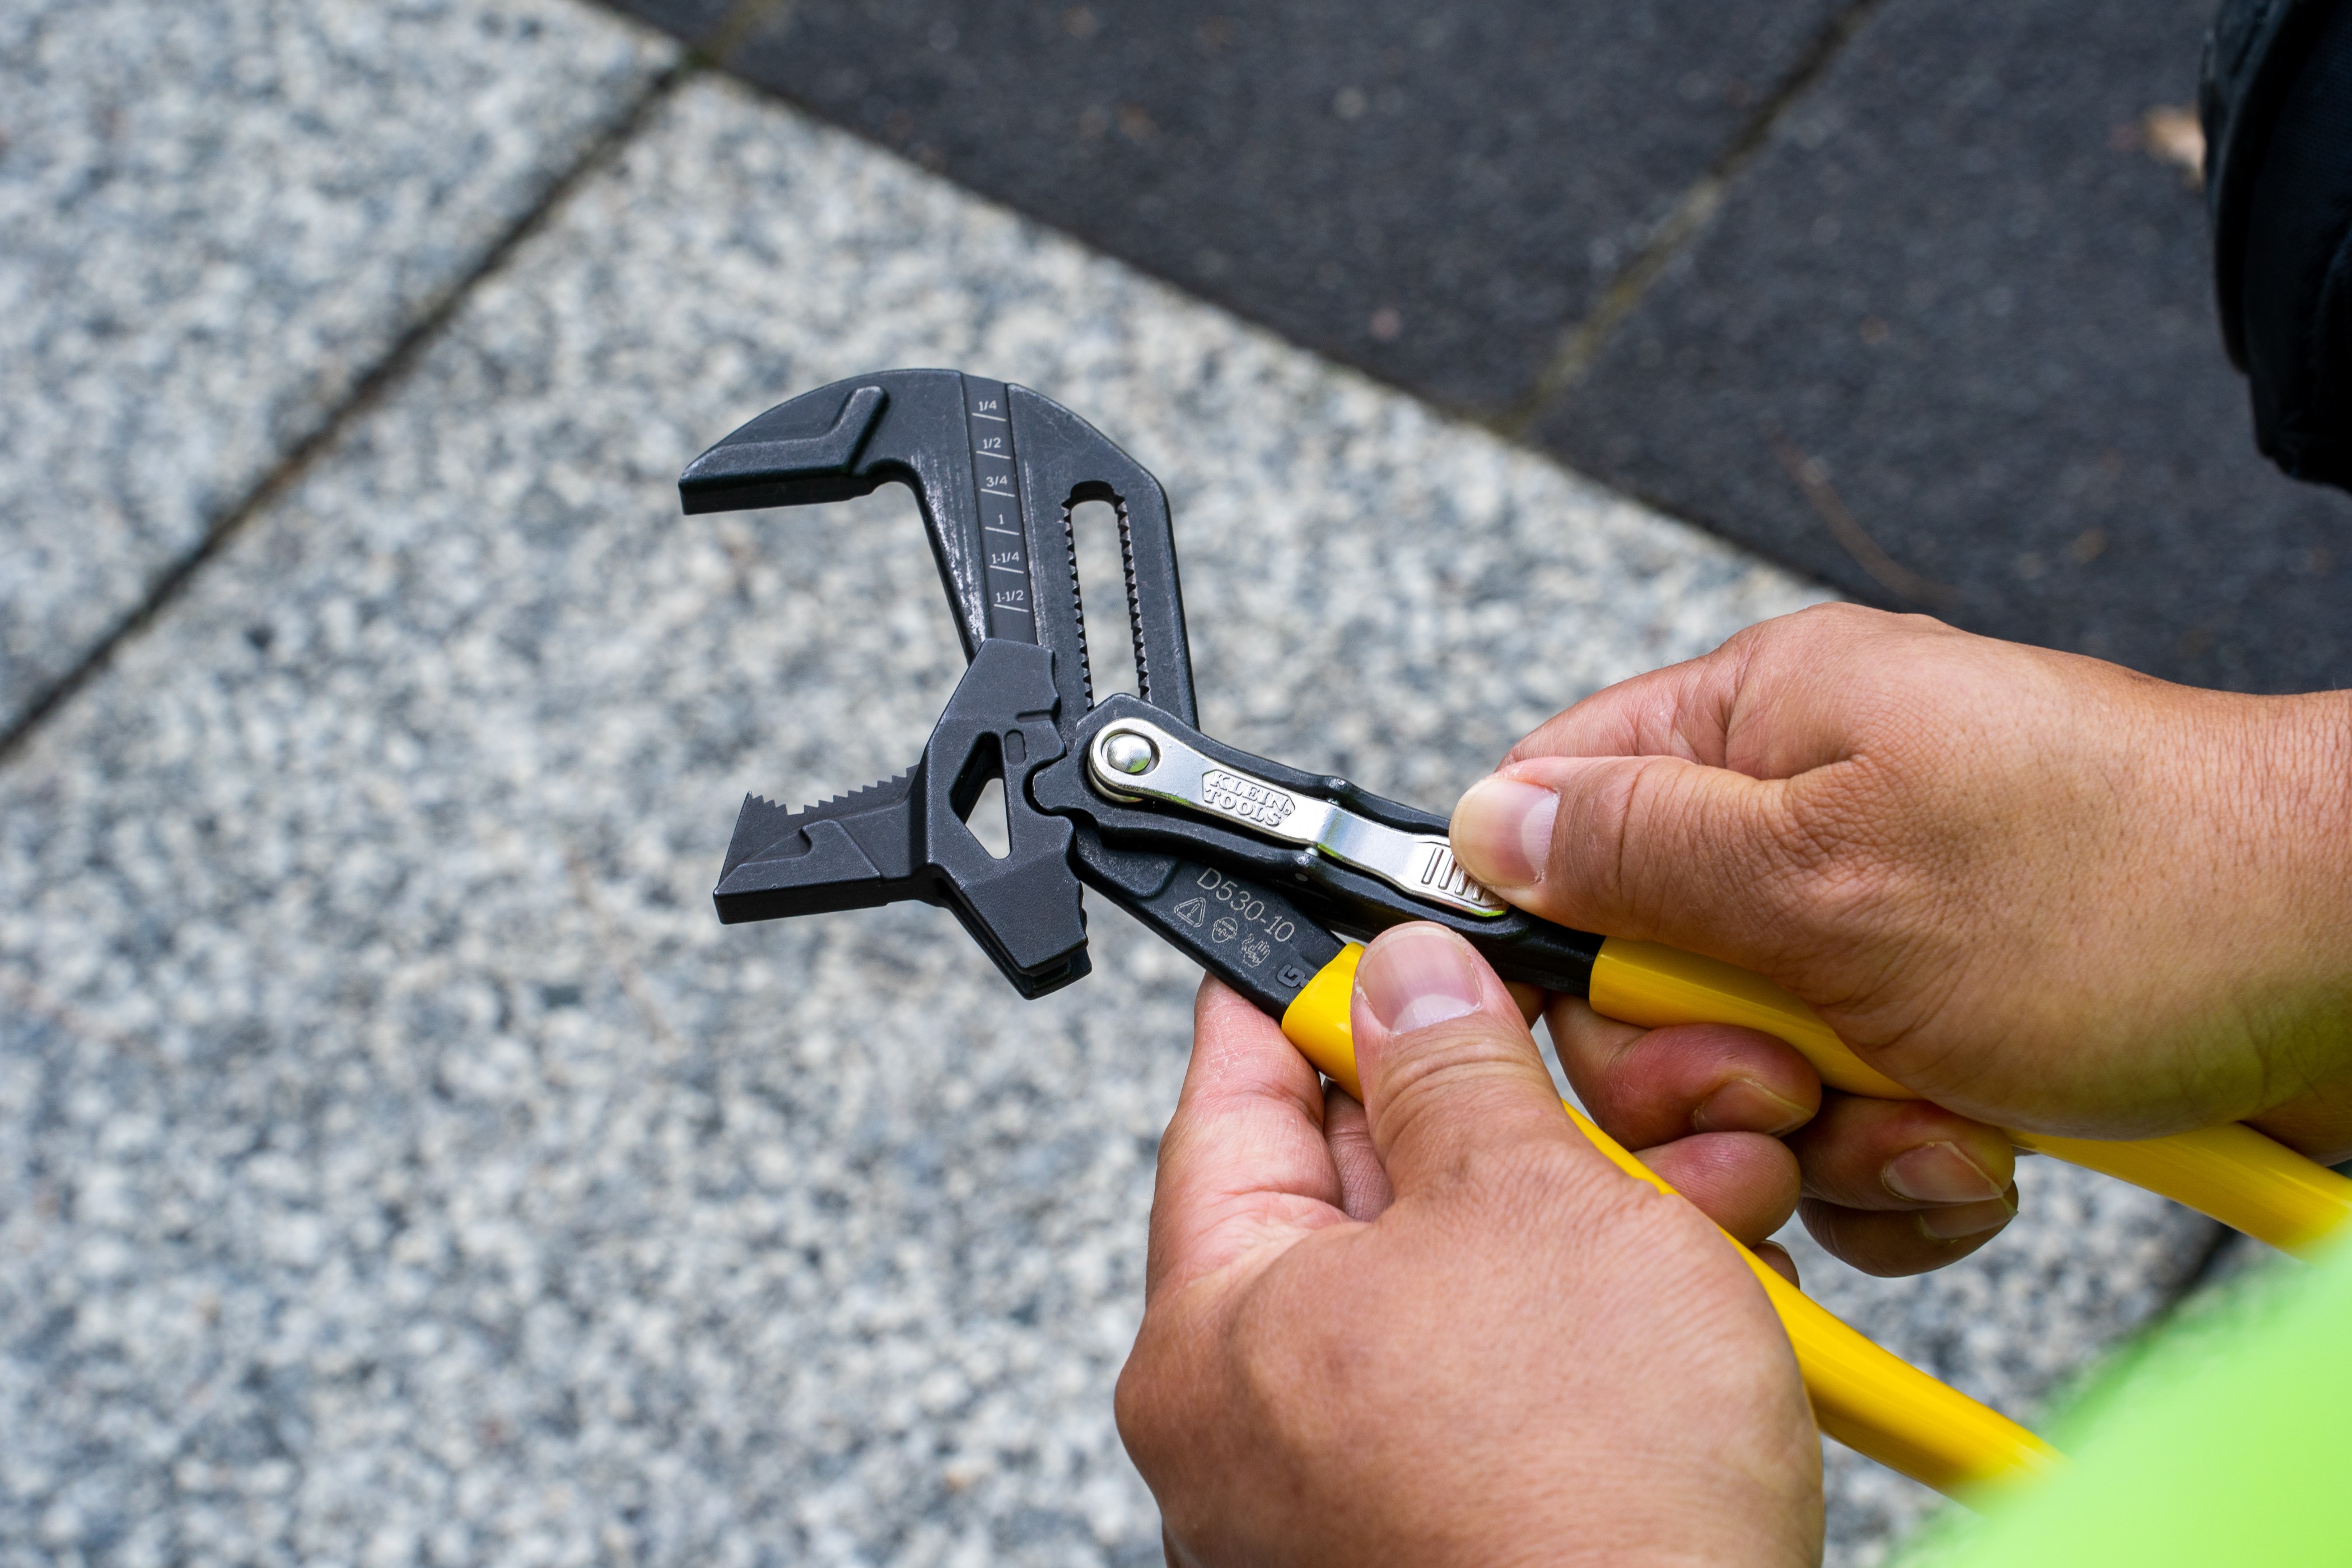 Klein Tools 10-in Universal Pliers Wrench in the Pliers department